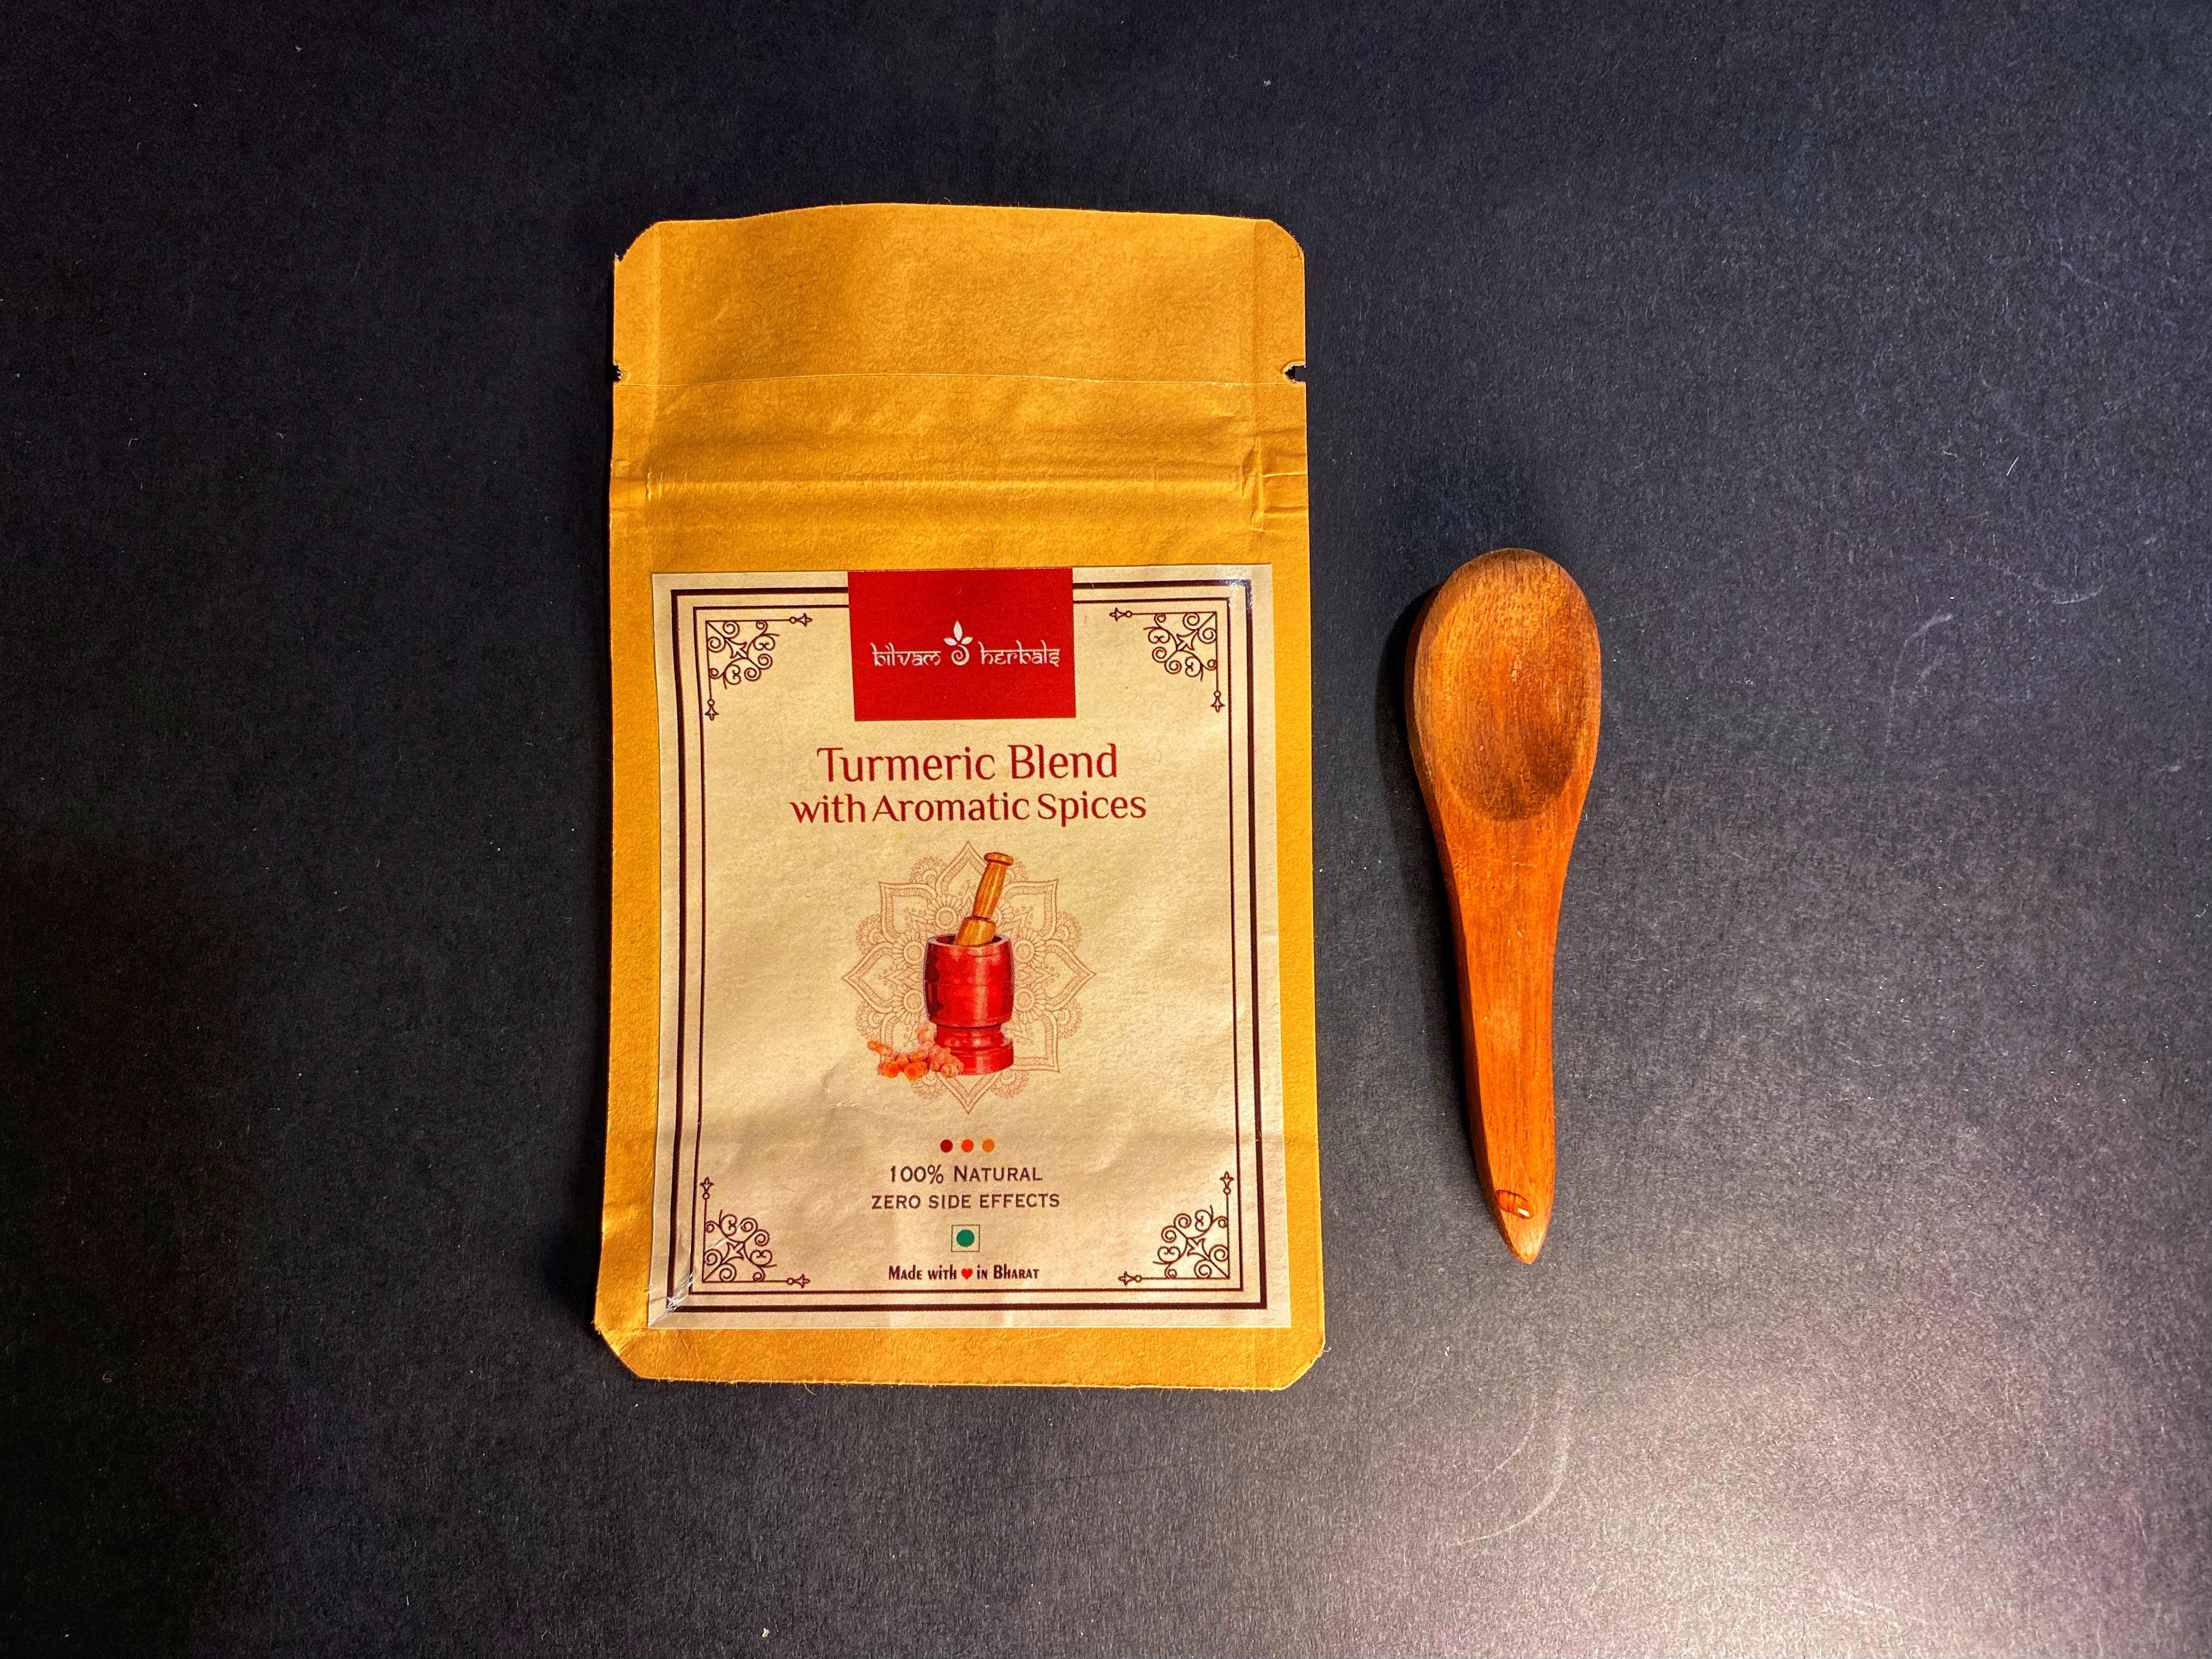 Turmeric Blend with Aromatic Spices